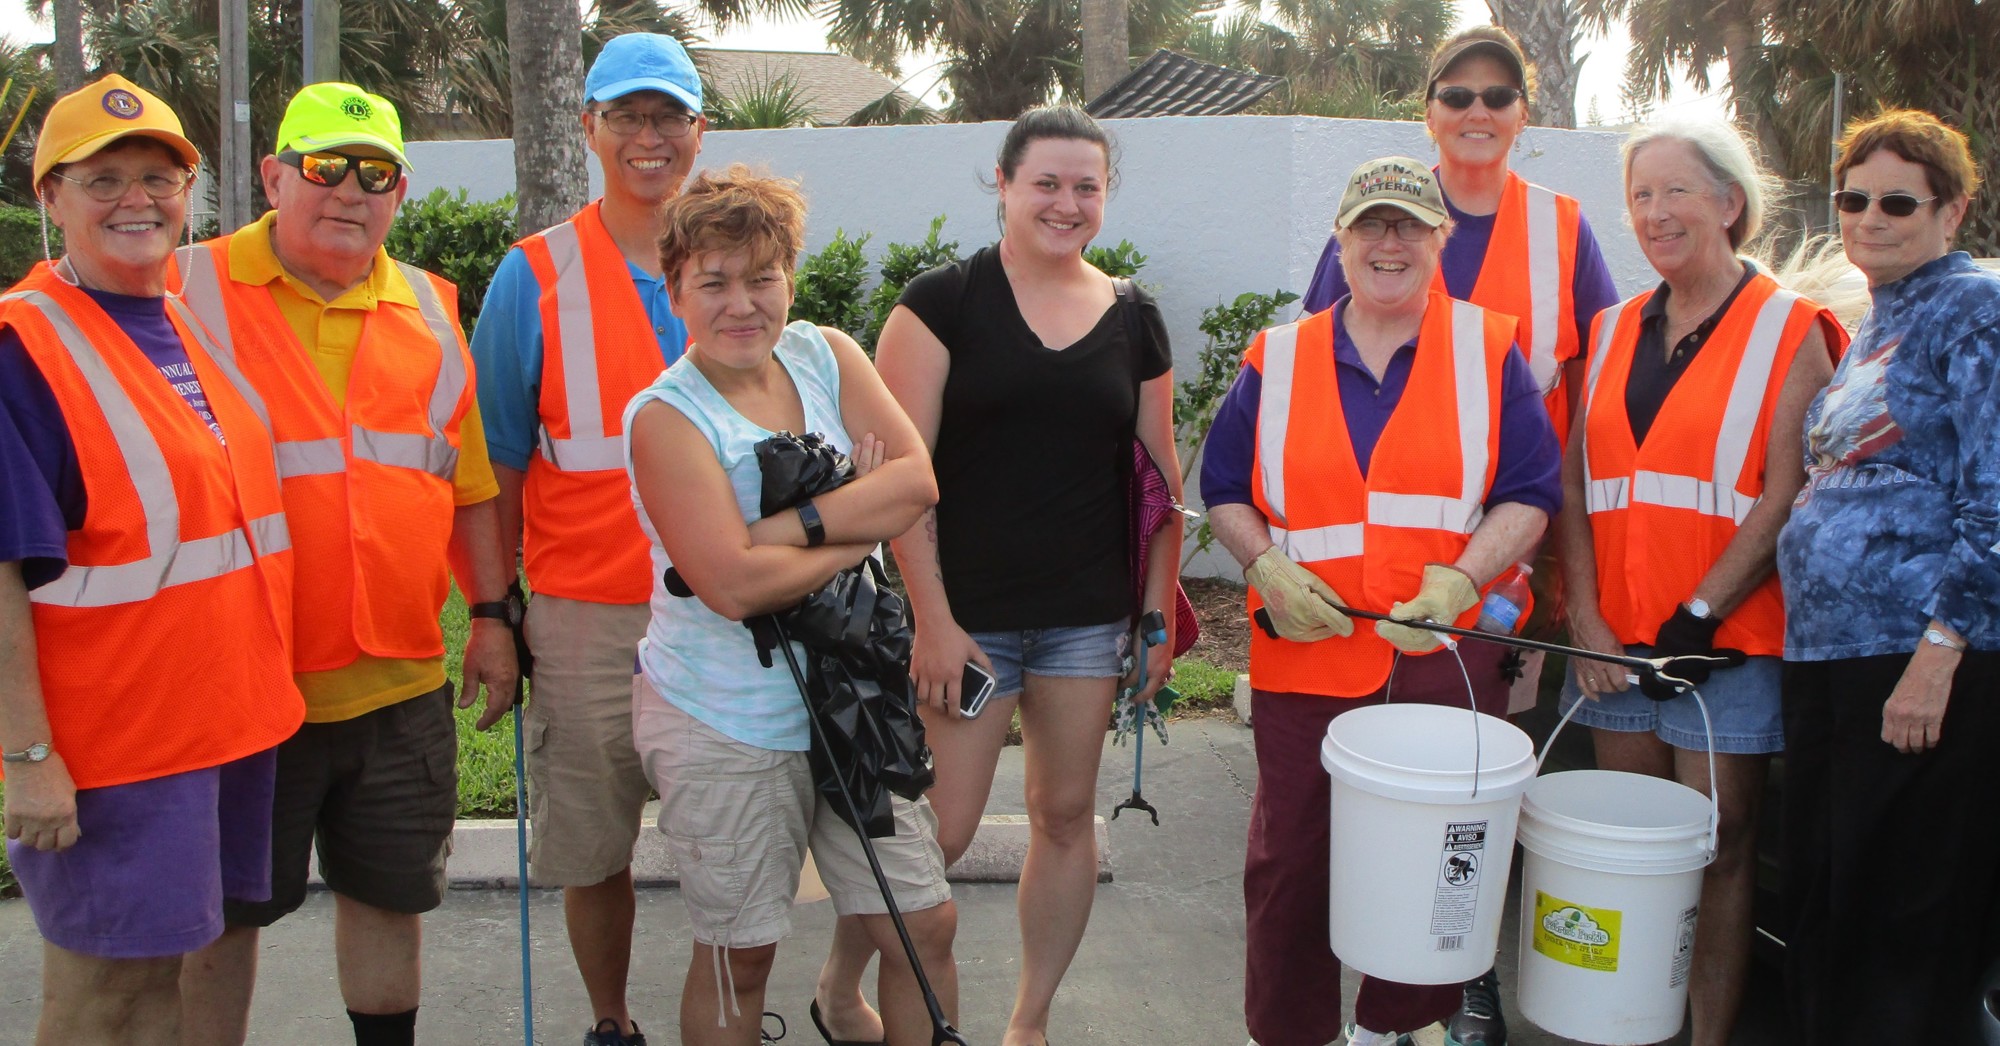 The Ormond-By-The-Sea Lions Club beach and road cleanup crew pose after their hard work. Photo courtesy of Lion Bobbie